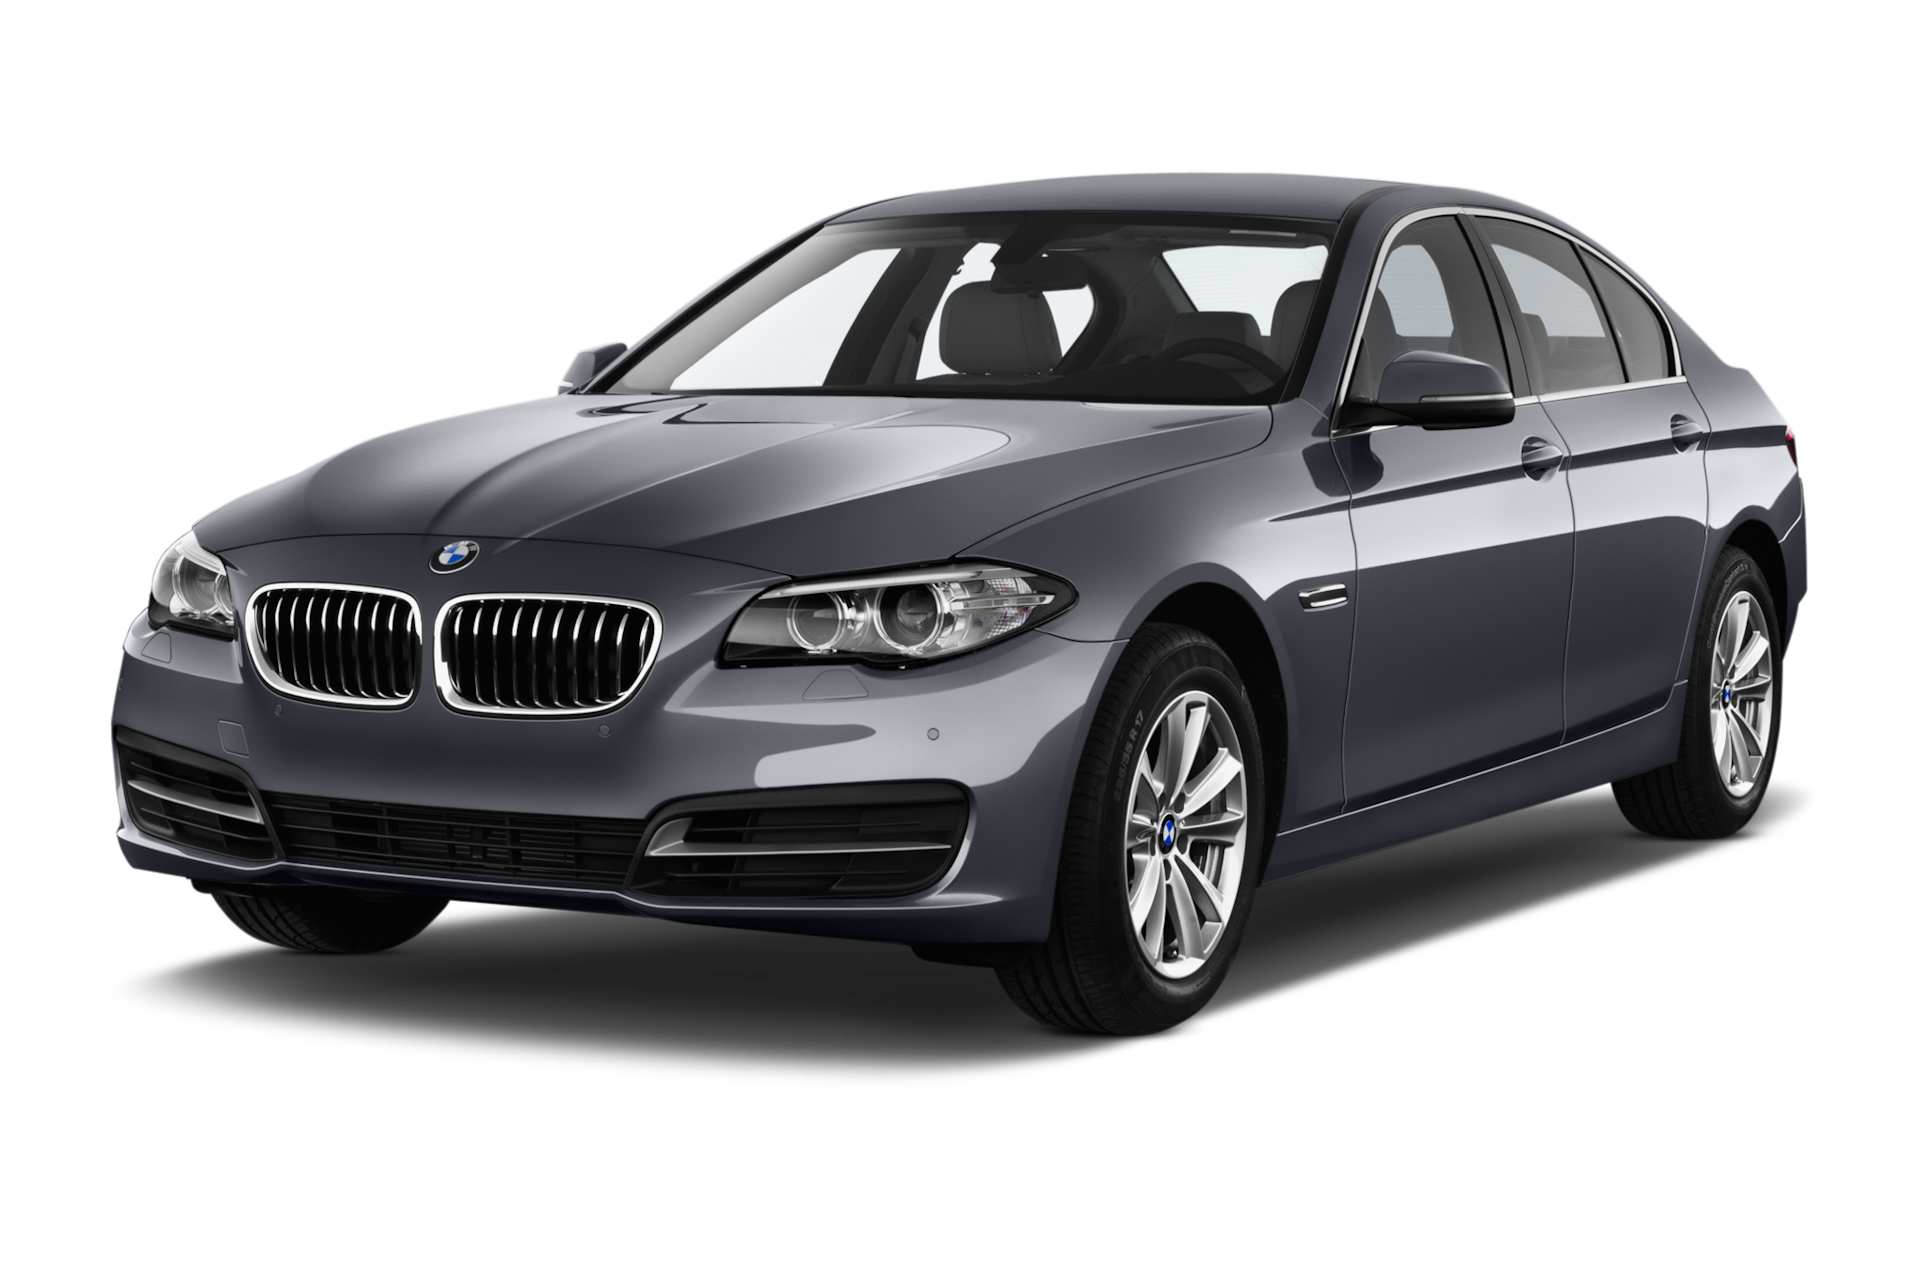 2014 BMW 5-Series Prices, Reviews, and Photos - MotorTrend